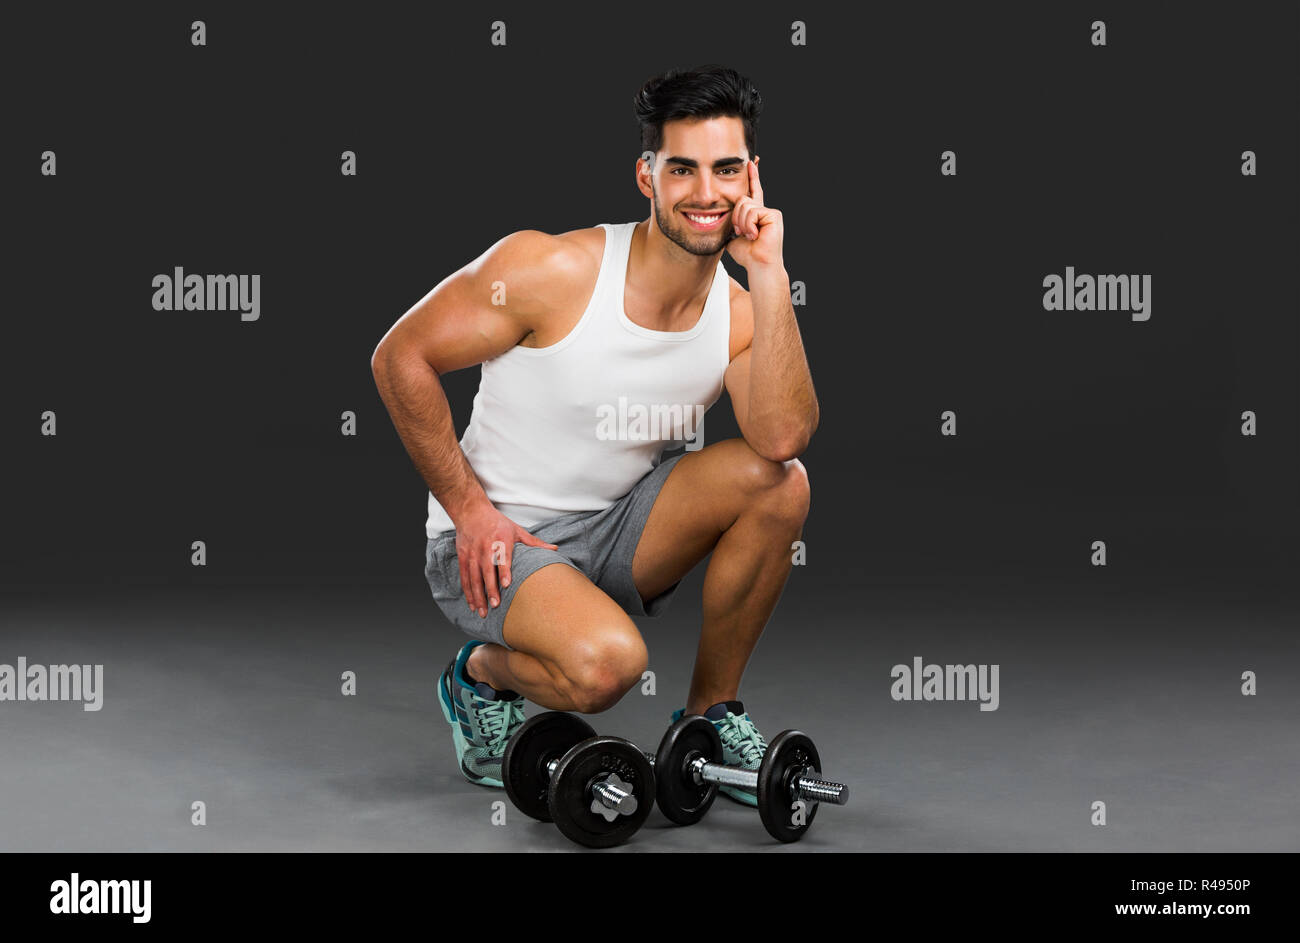 Athletic man lifting weights Banque D'Images